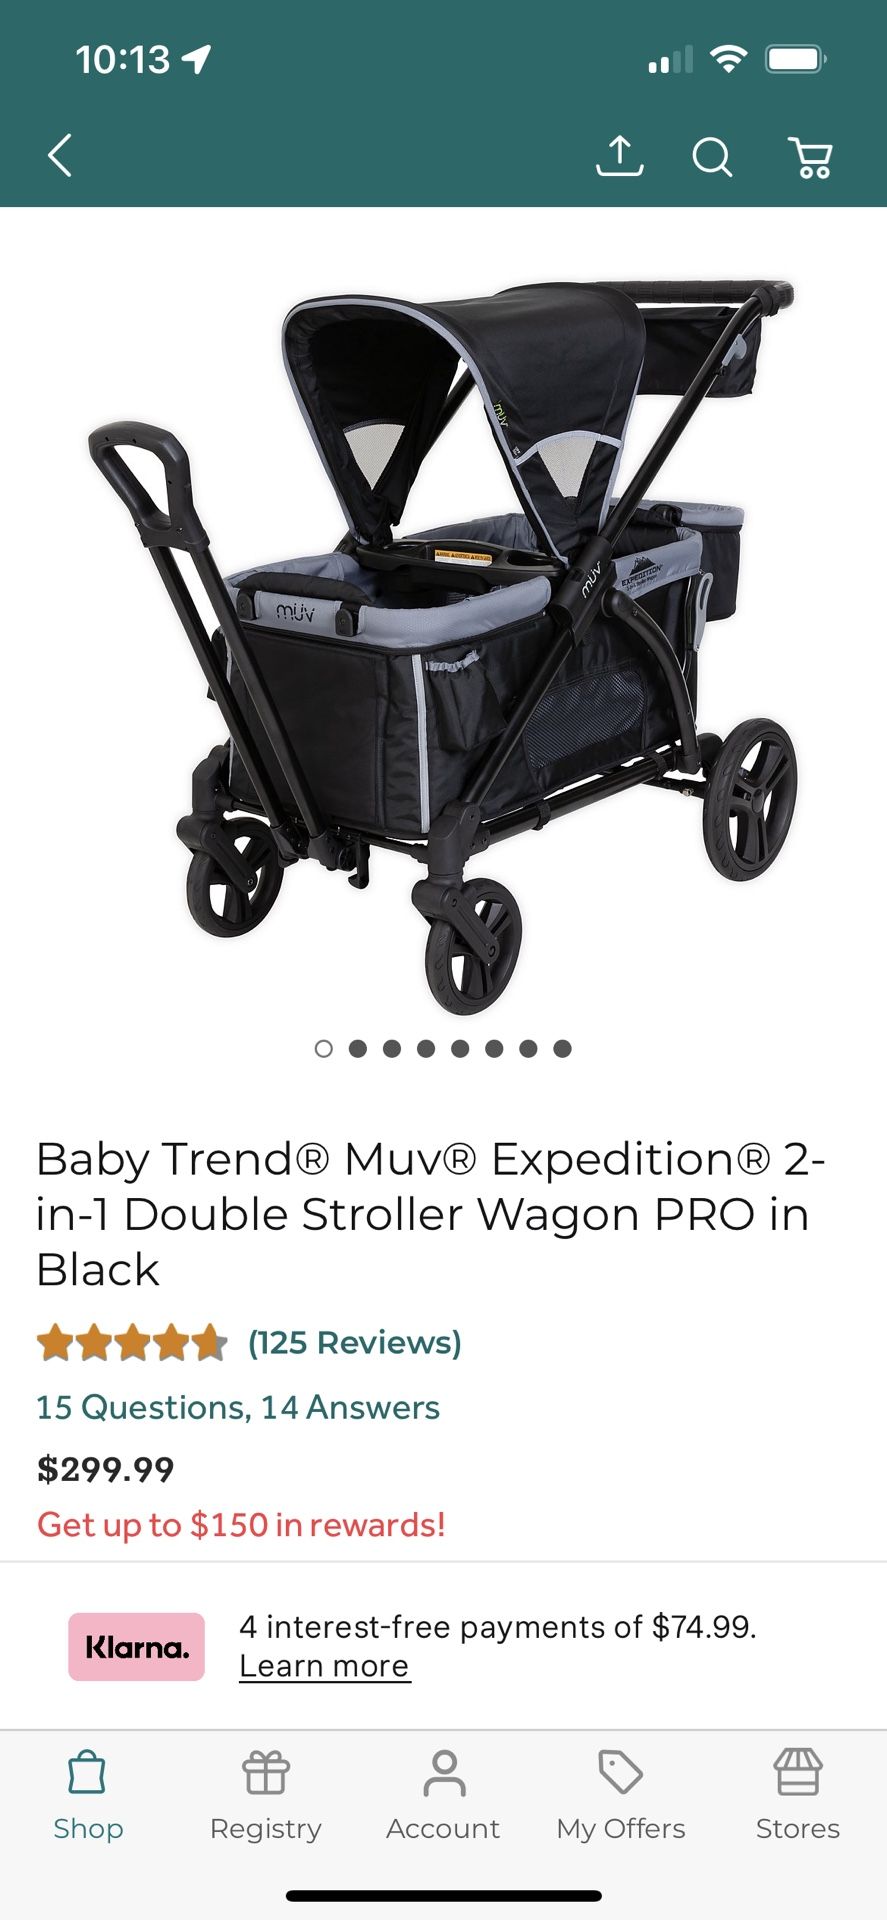 Baby Trend® Muv® Expedition® 2- in-1 Double Stroller Wagon PRO in Black (125 Reviews) 15 Questions, 14 Answers $299.99 Get up to $150 in rewards! Klar